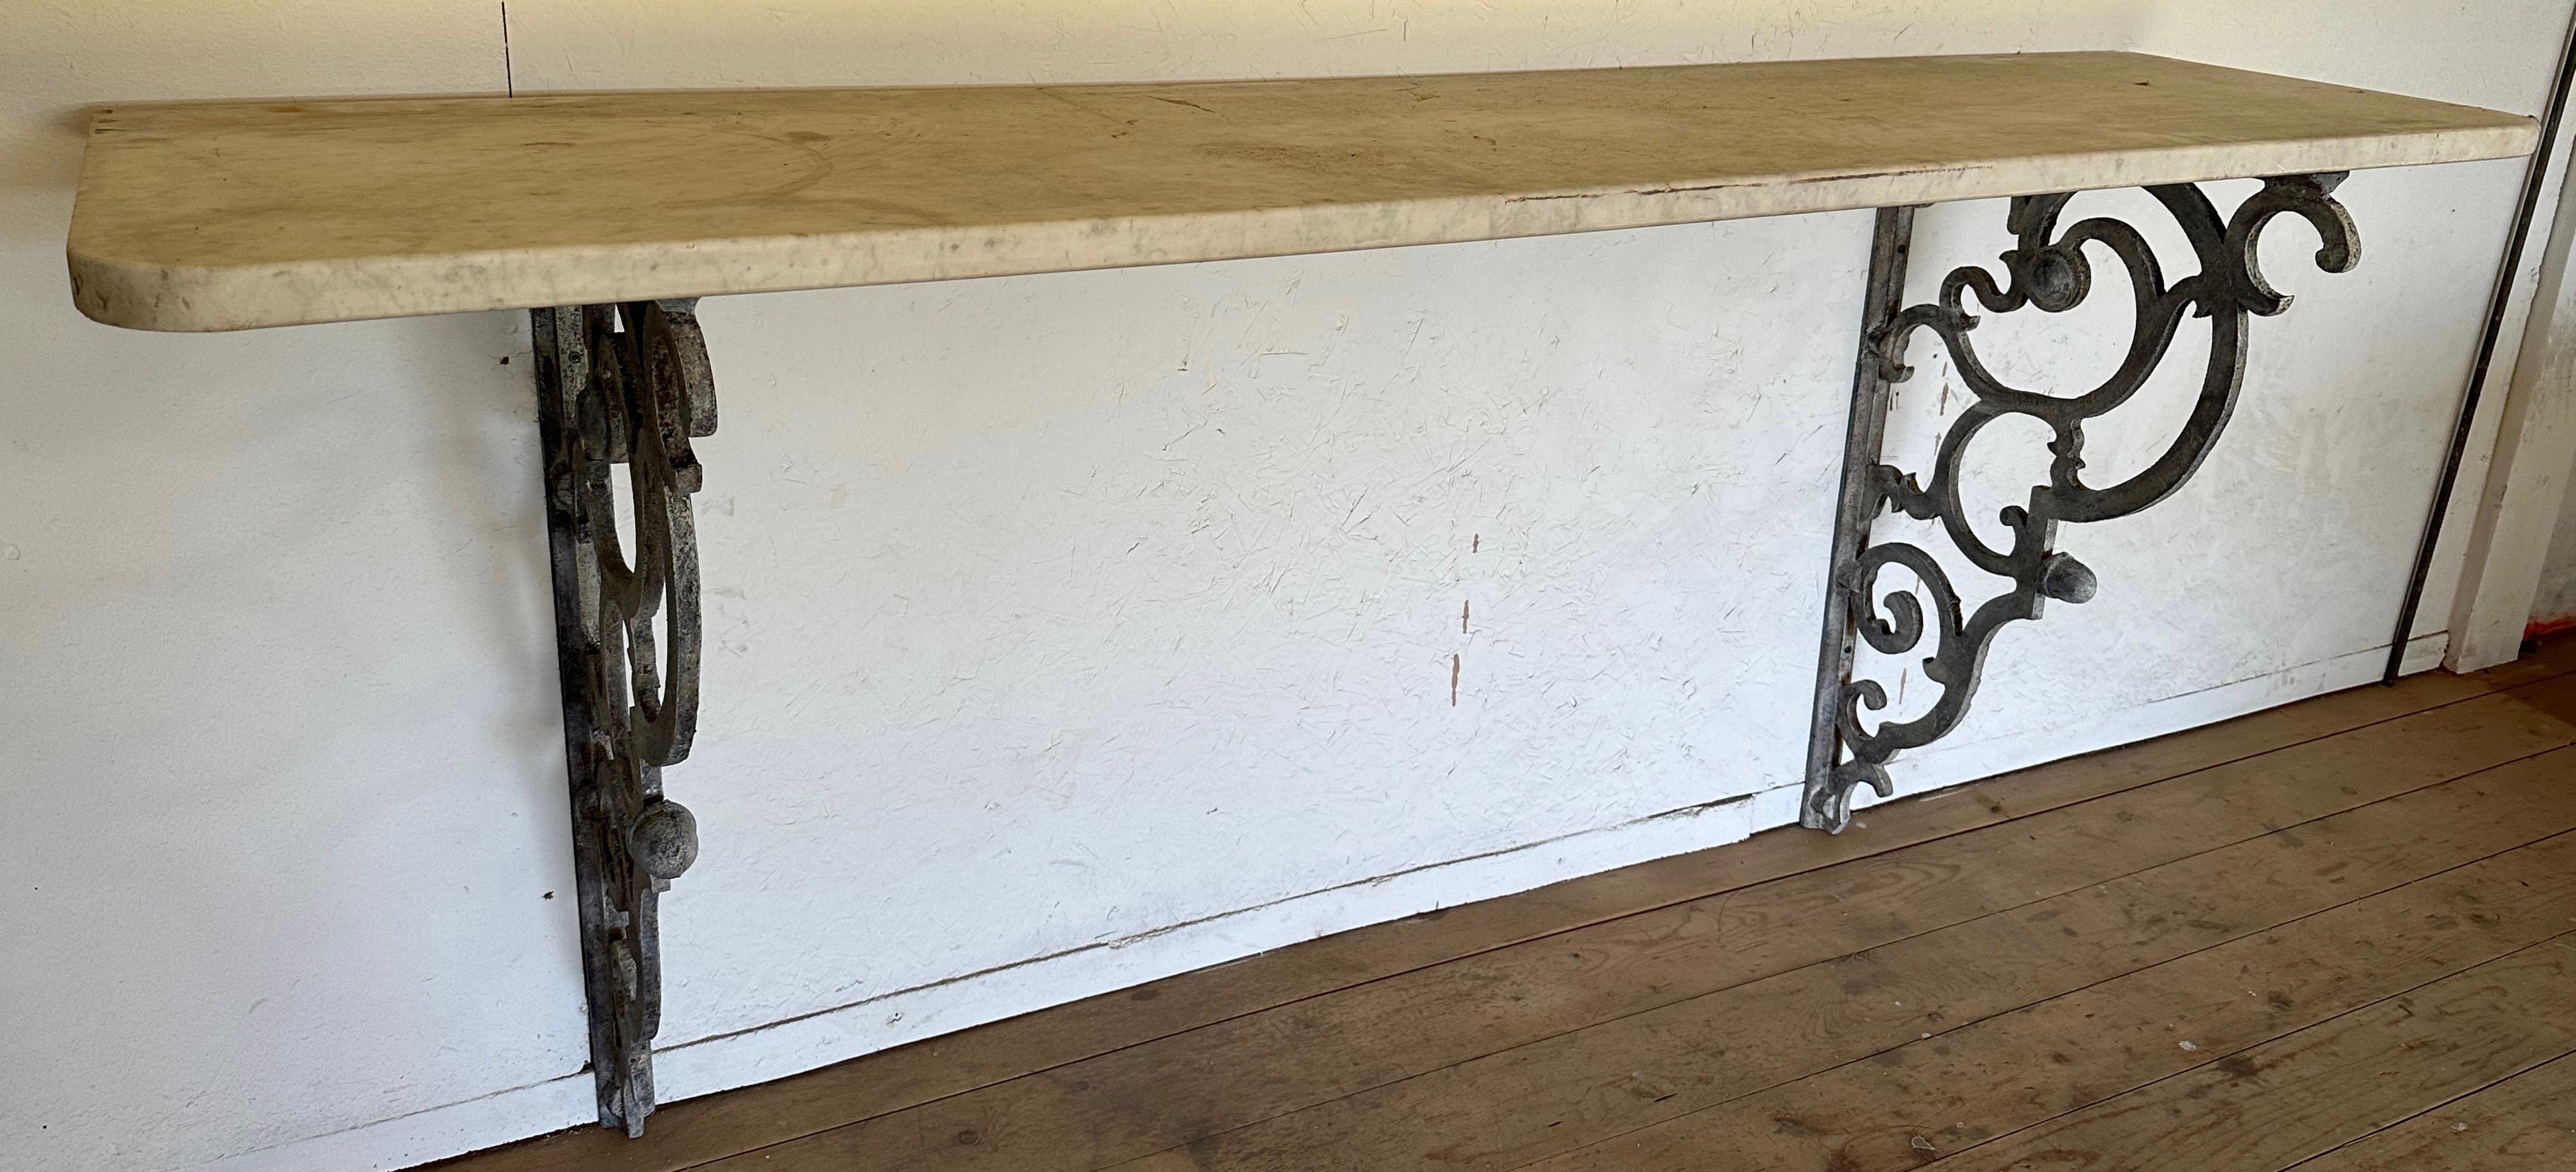 The Rococo Baroque style wall hung brackets are topped with an antique marble top making them a beautiful addition to any home, garden or patio.
These shelving brackets will make a wonderful console table in an entry foyer, a dining room, or in a